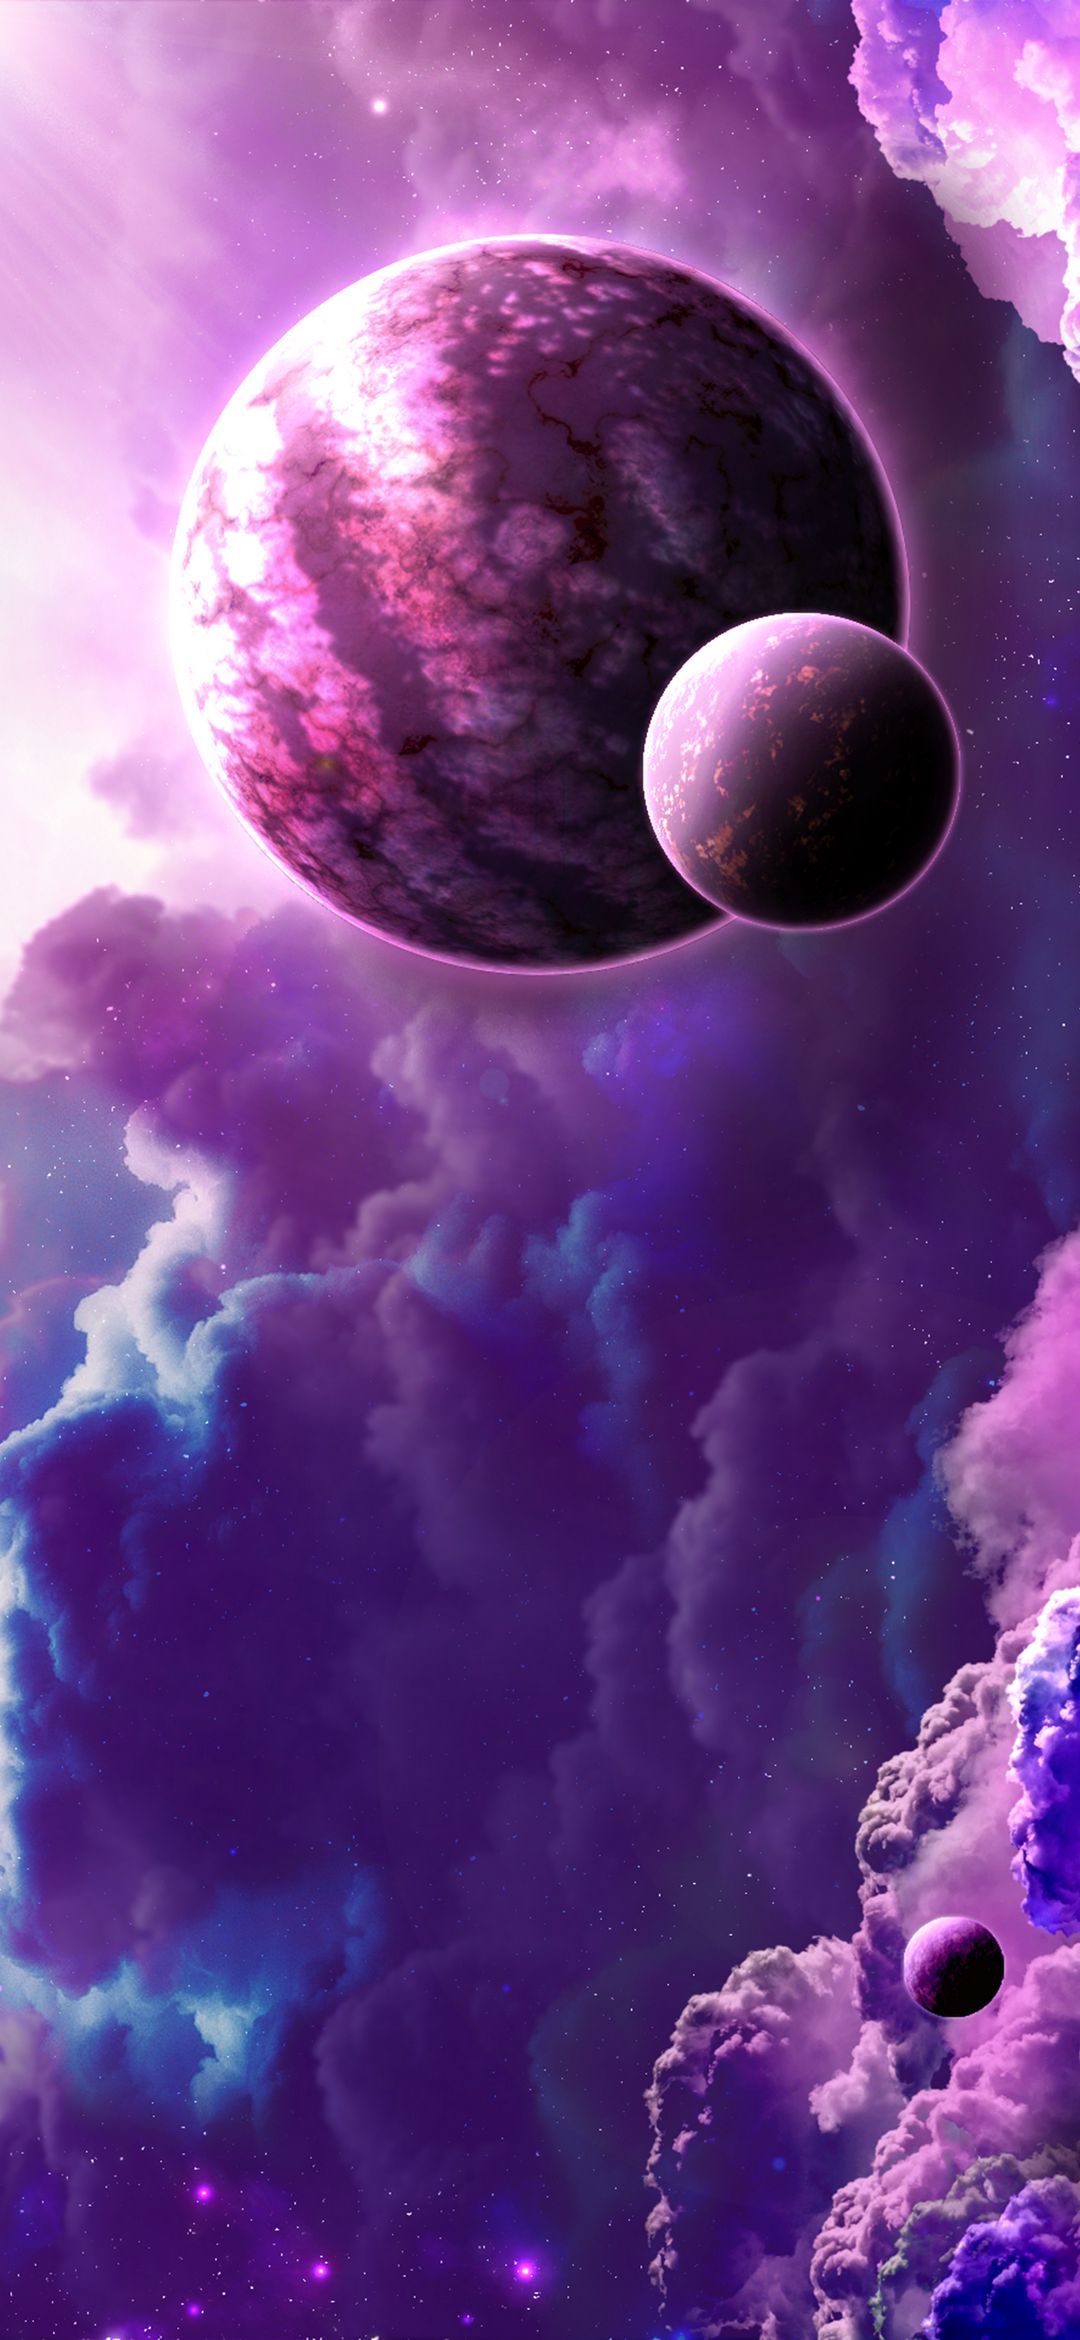 Wallpaper Clouds Plnets Aesthetic, Planet, Universe, Star, Space, Background Free Image